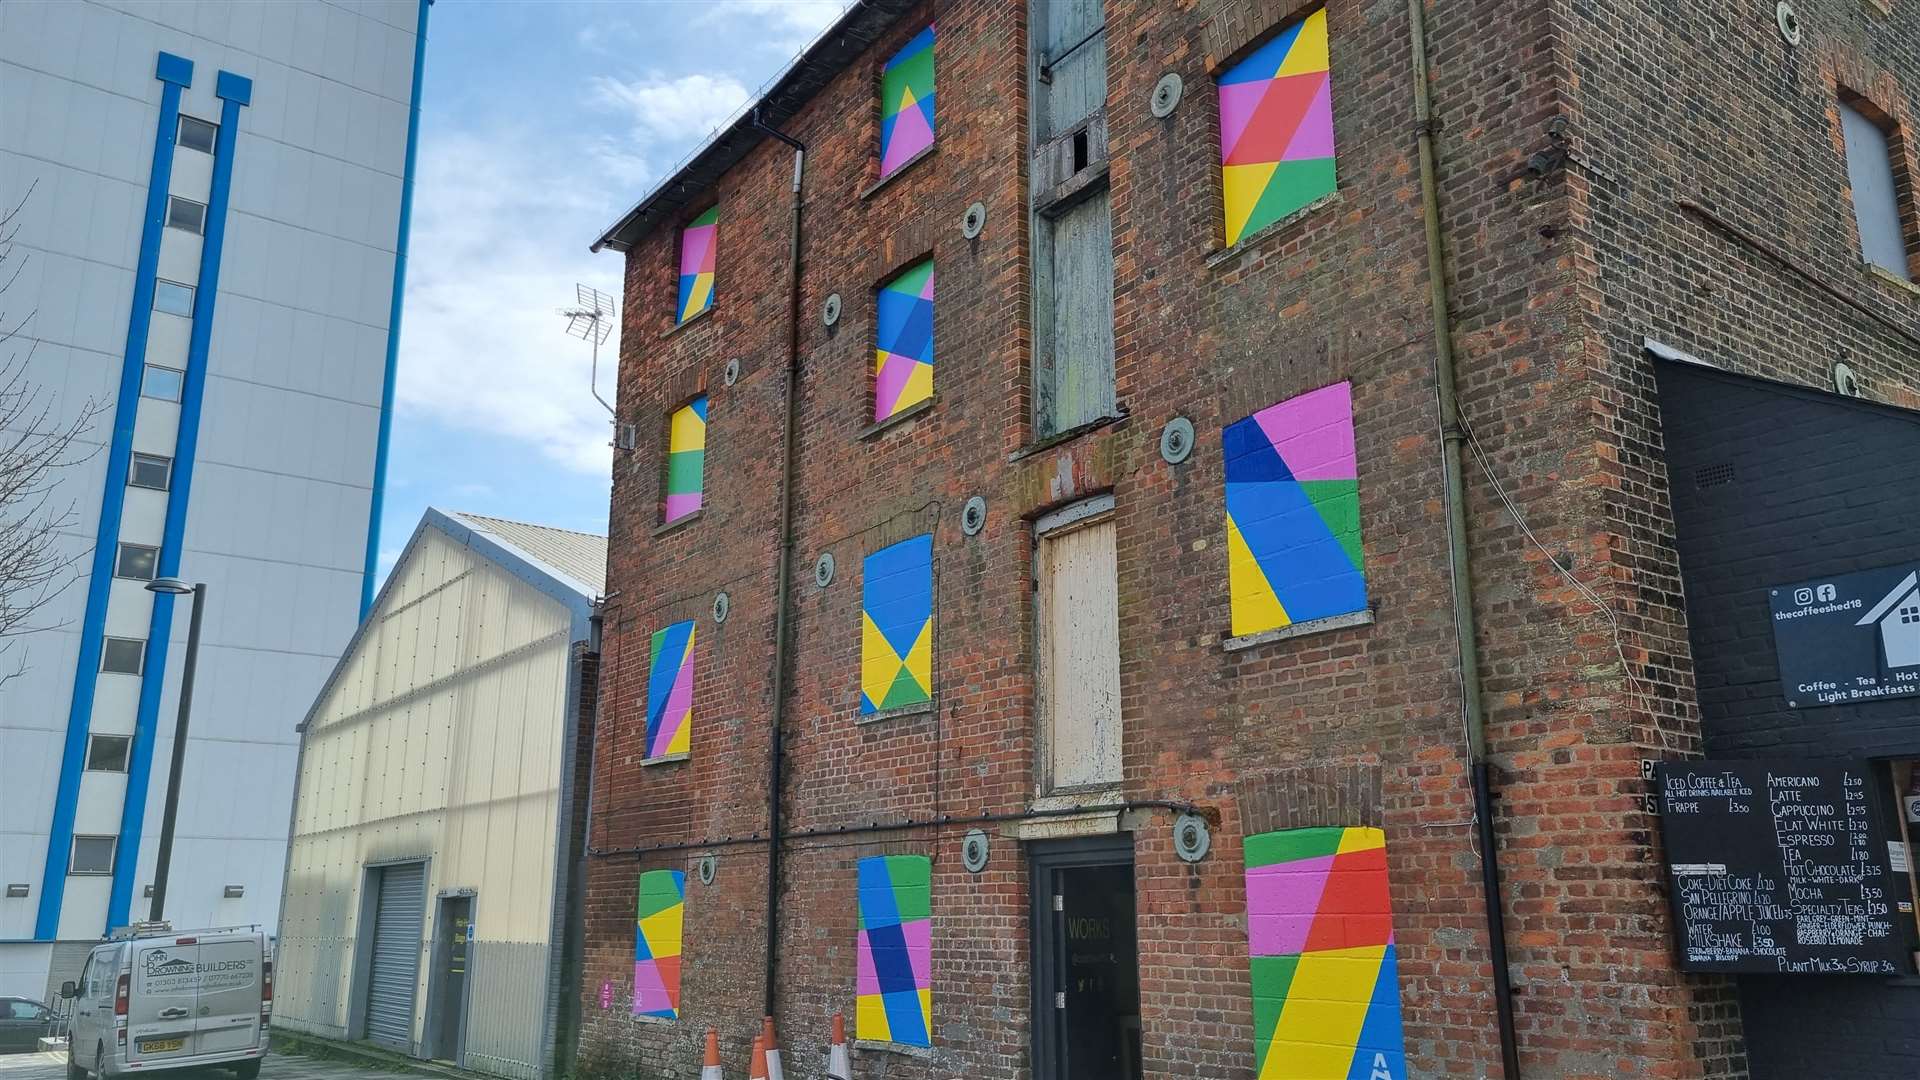 "Traverse" by The London Mural Company and Accent London at the Coachworks